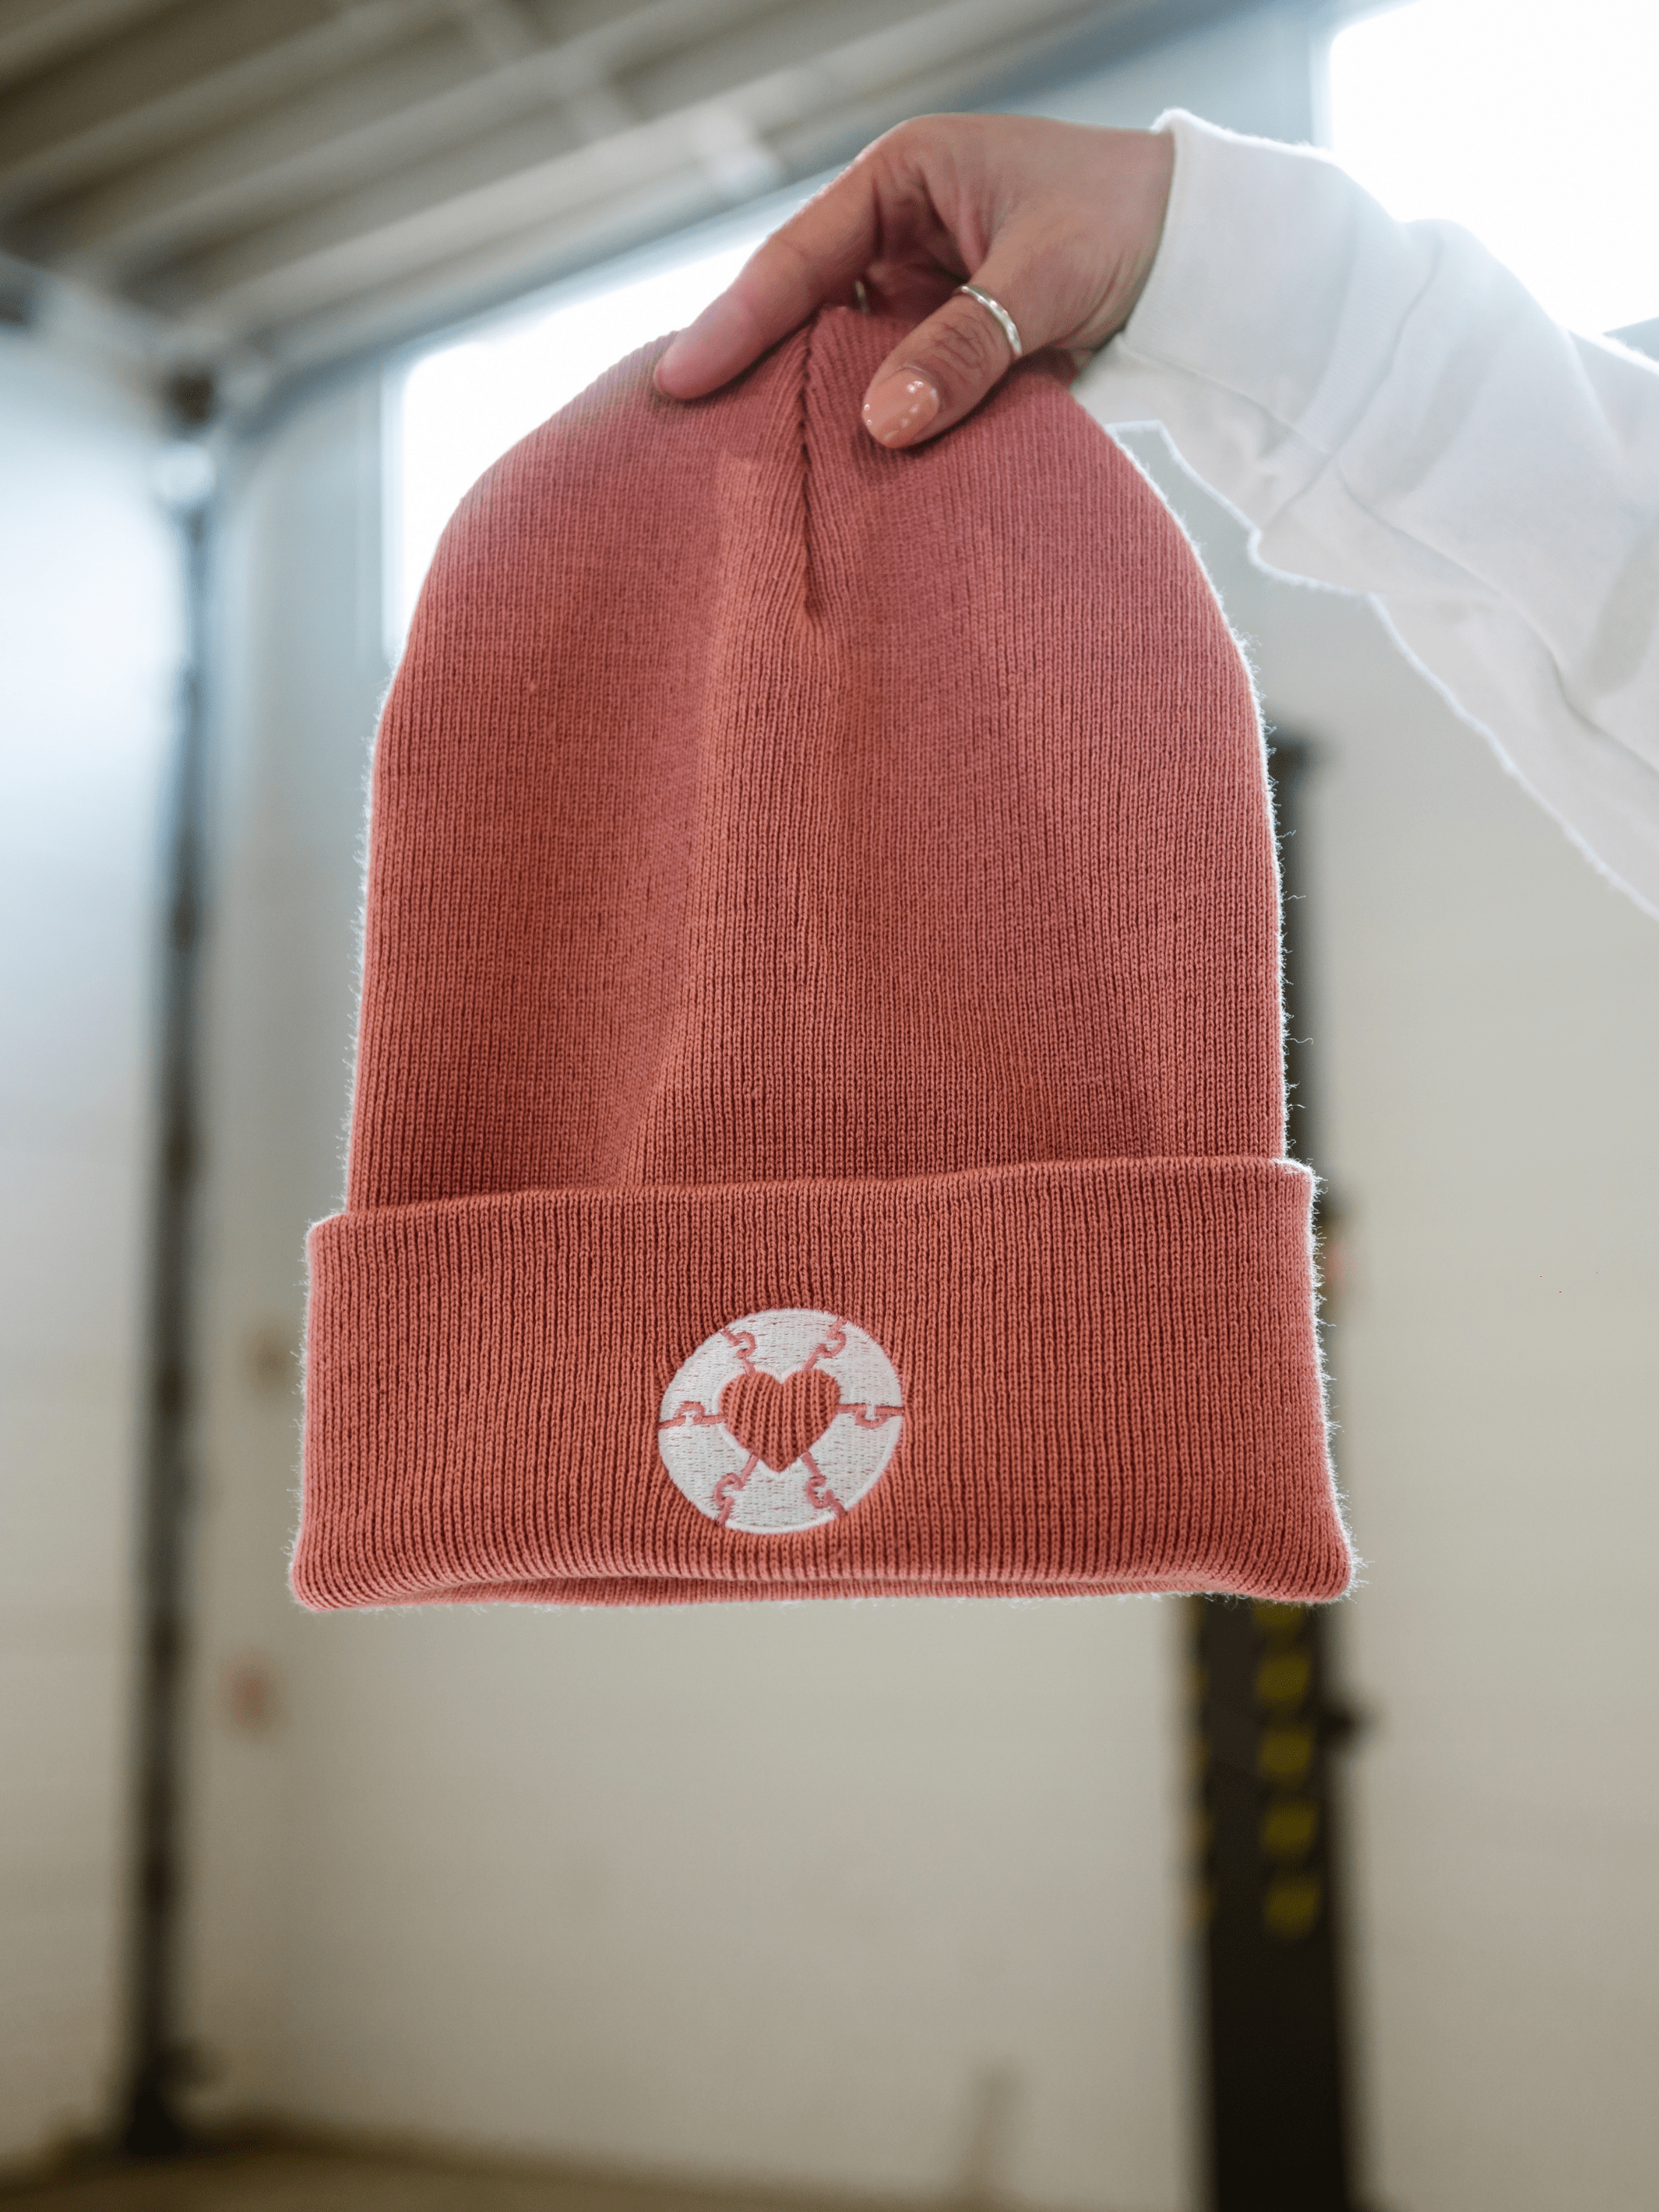 Local Laundry Ryder's Toque in faded rose toque featuring a white heart patch on the front. Made in Canada, sustainably sourced and manufactured